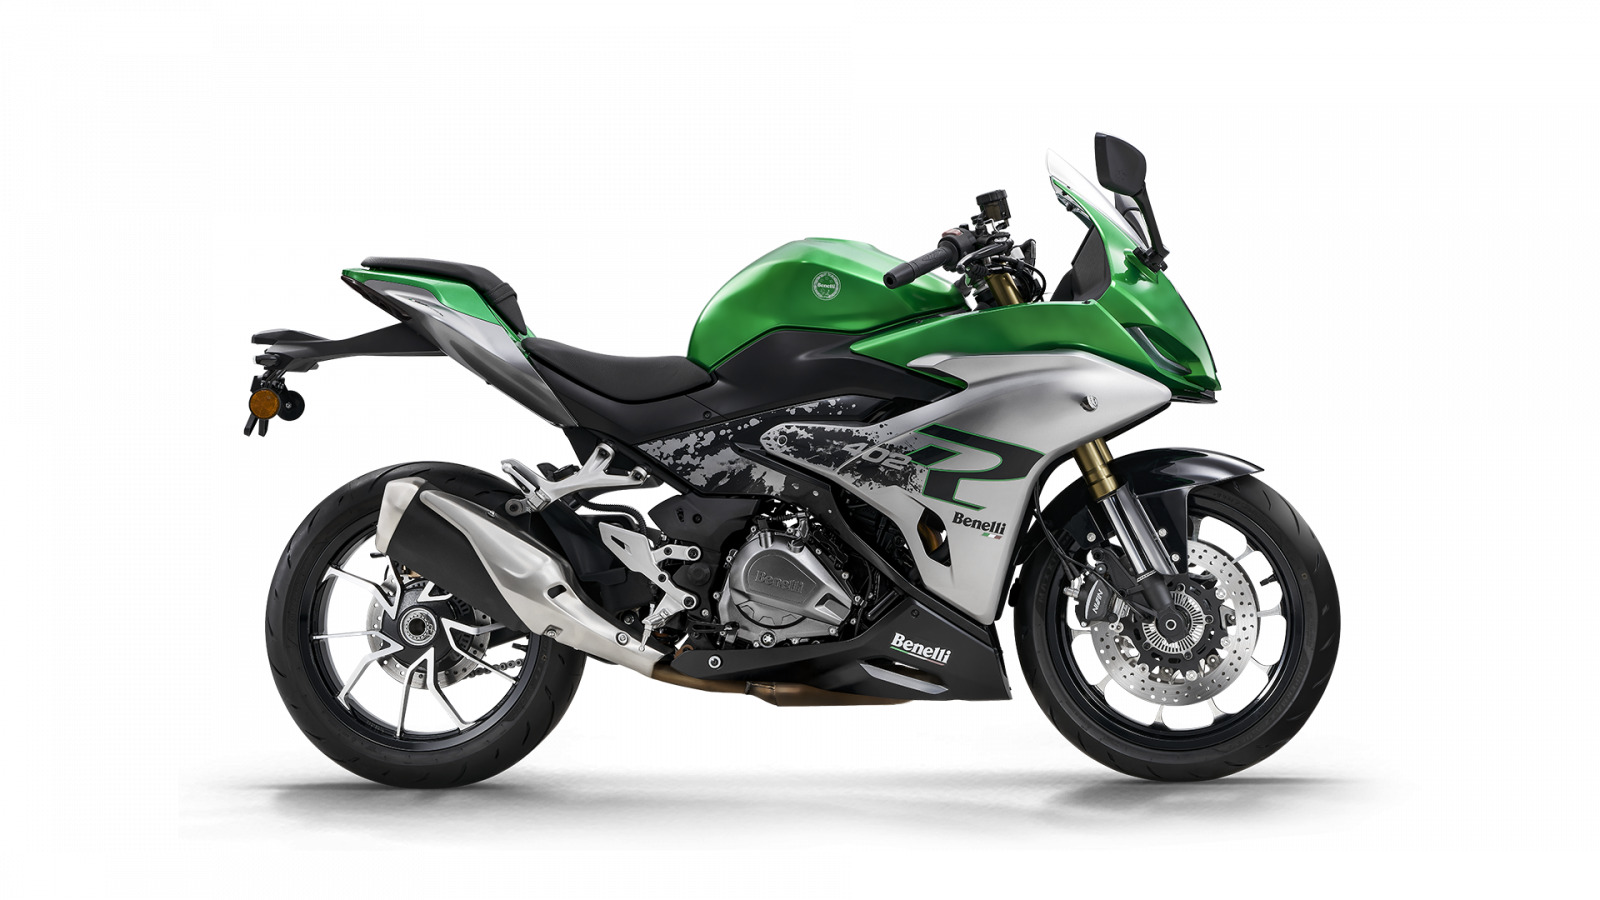 Benelli Tornado 402R Sportbike Makes Official Debut - Price Revealed! - image